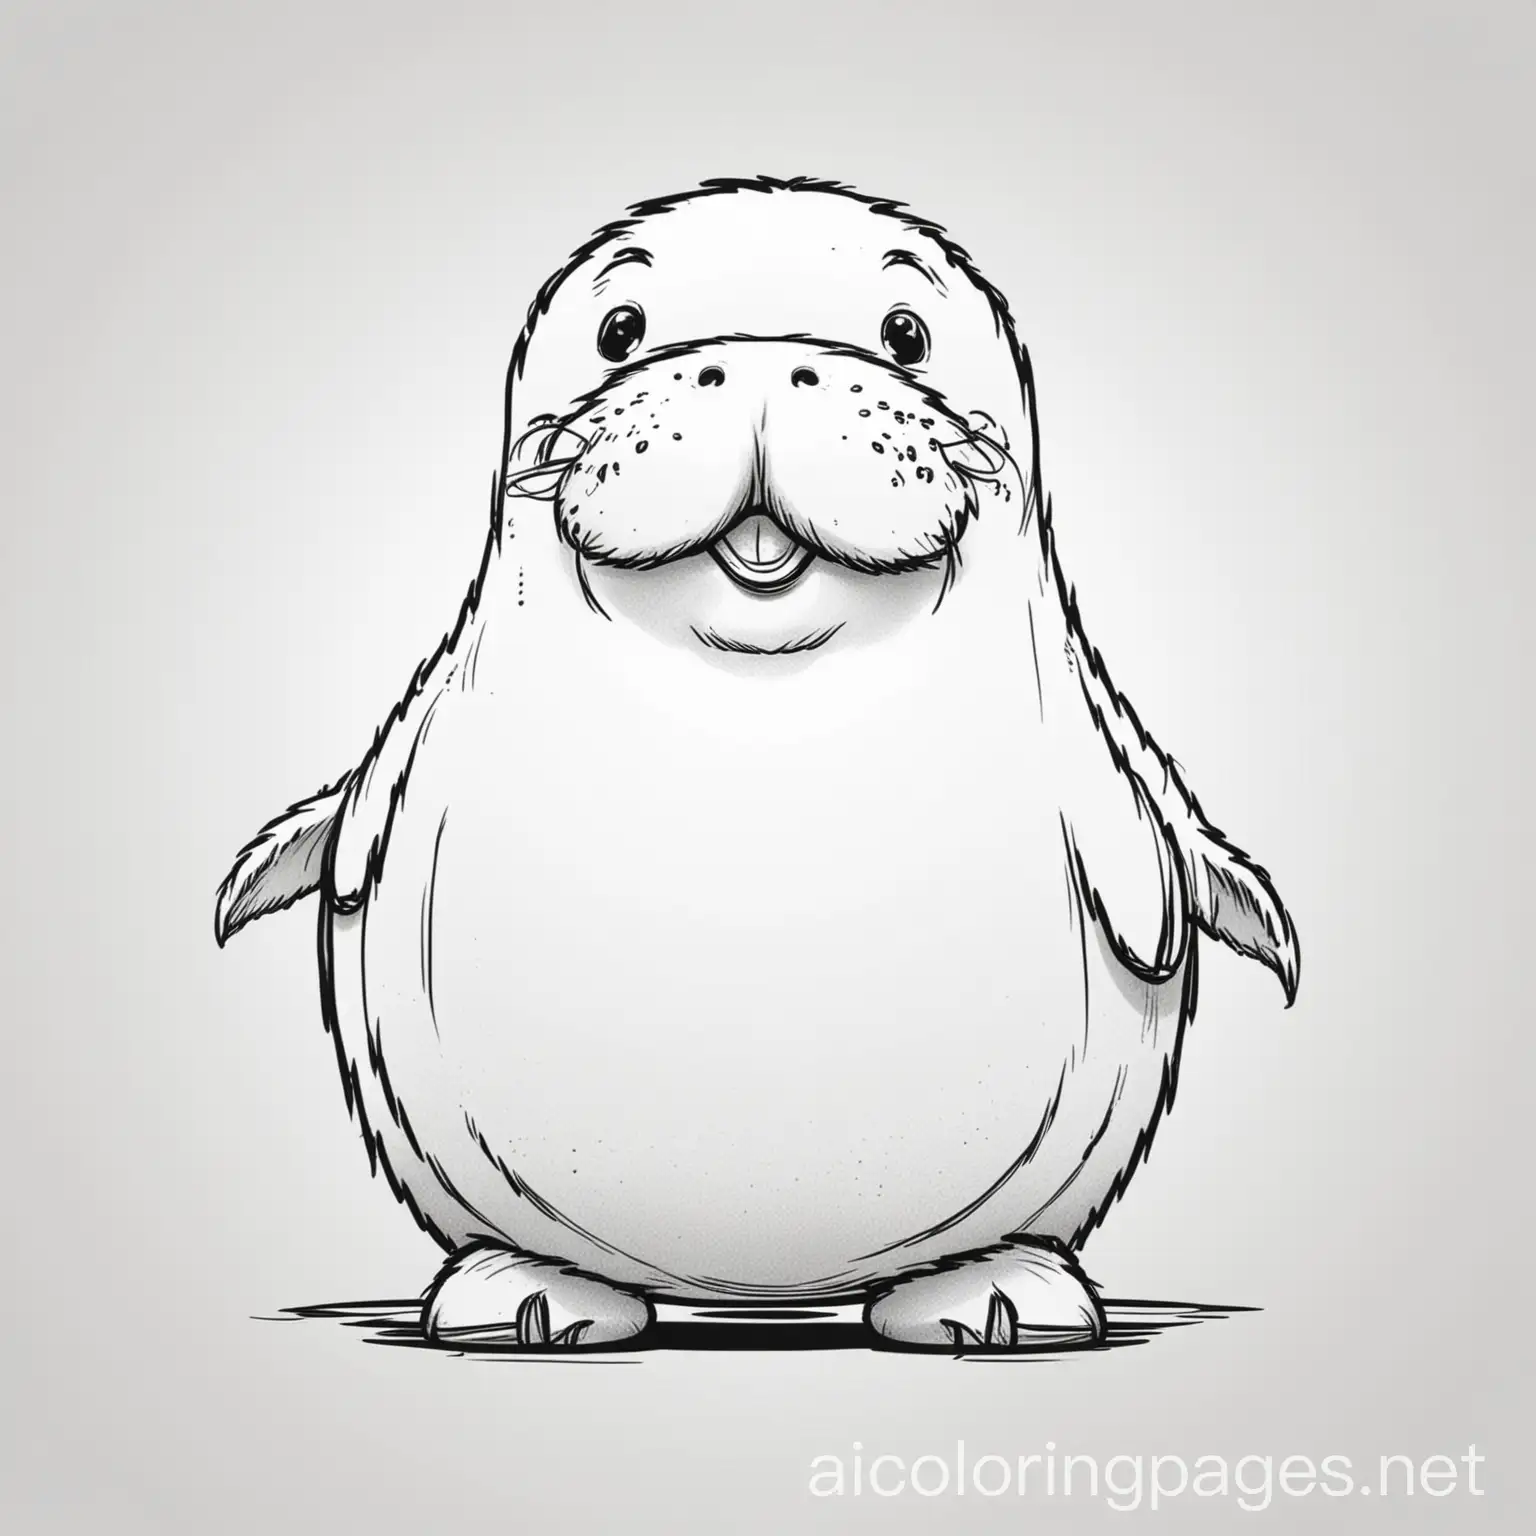 Cartoon-Walrus-Coloring-Page-with-Simplicity-and-Ample-White-Space